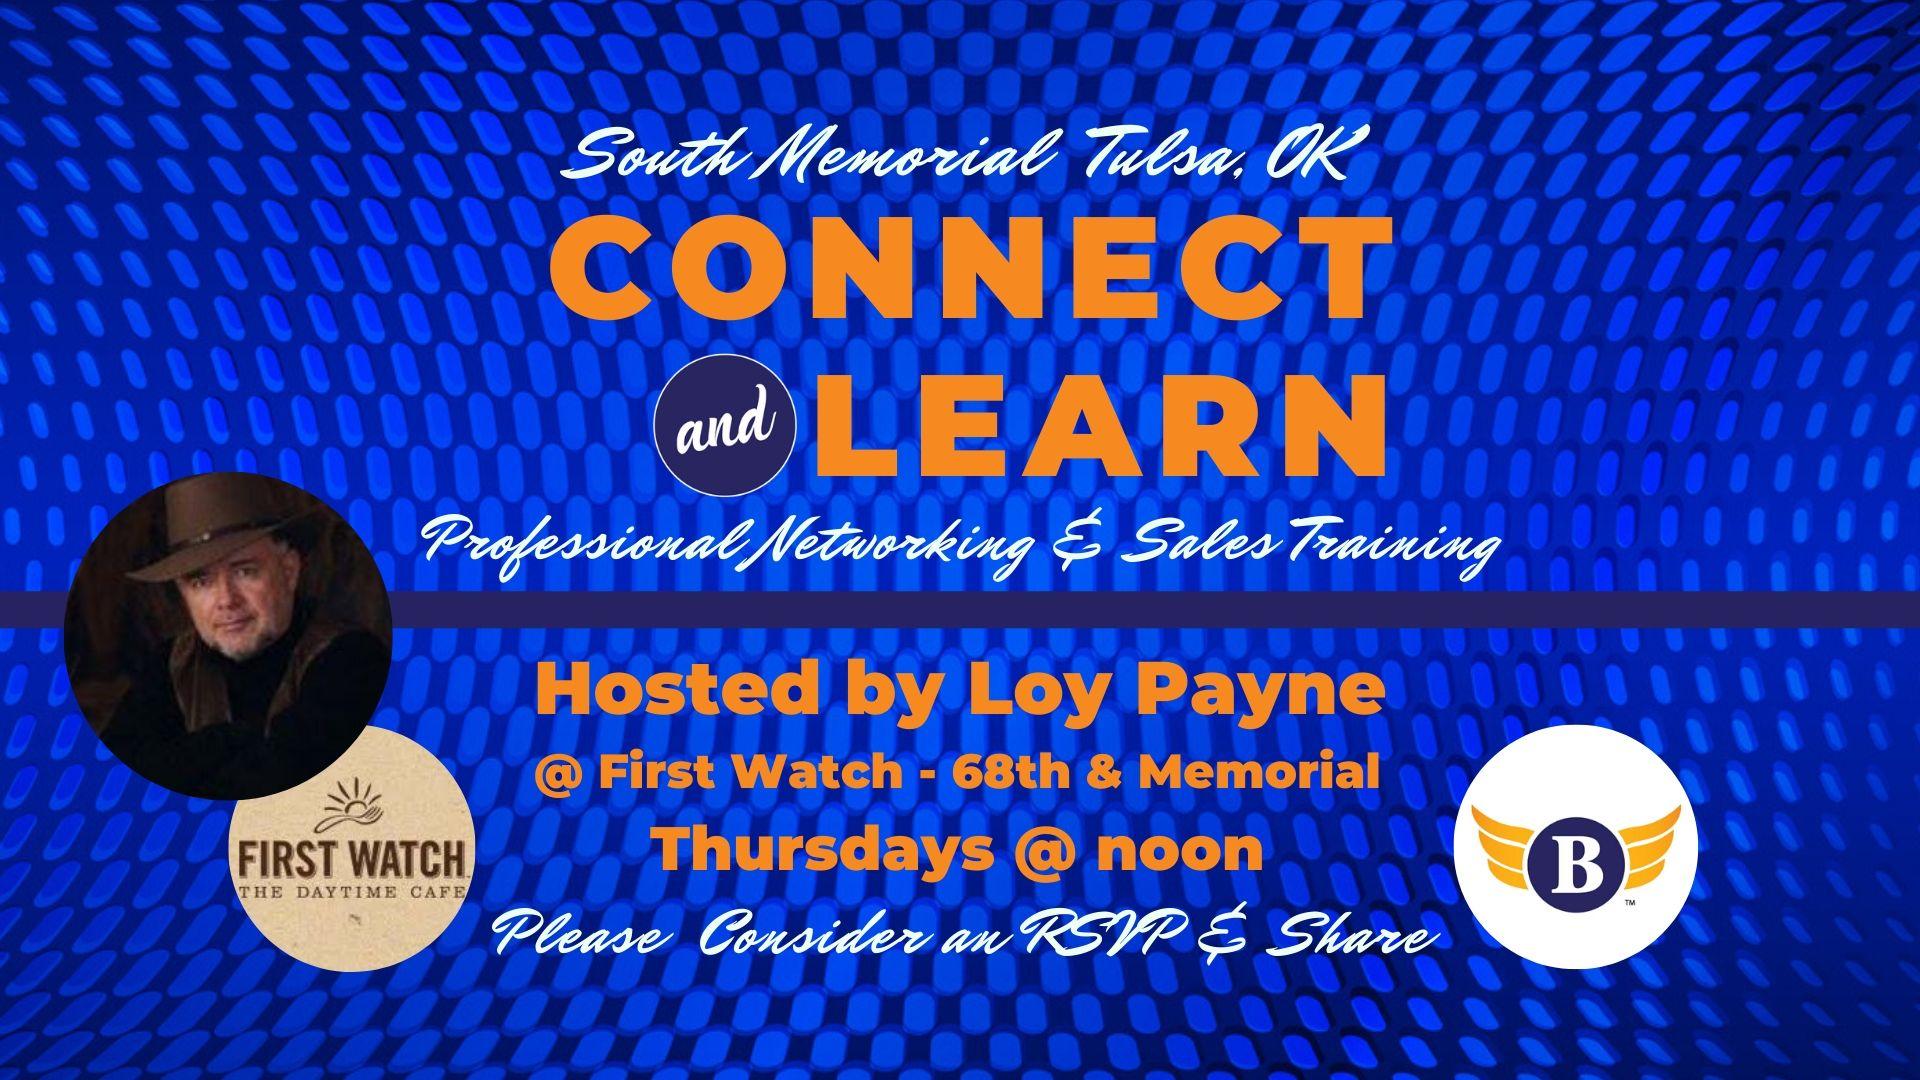 South Memorial, OK | Connect & Learn Professional Networking & Sales Training